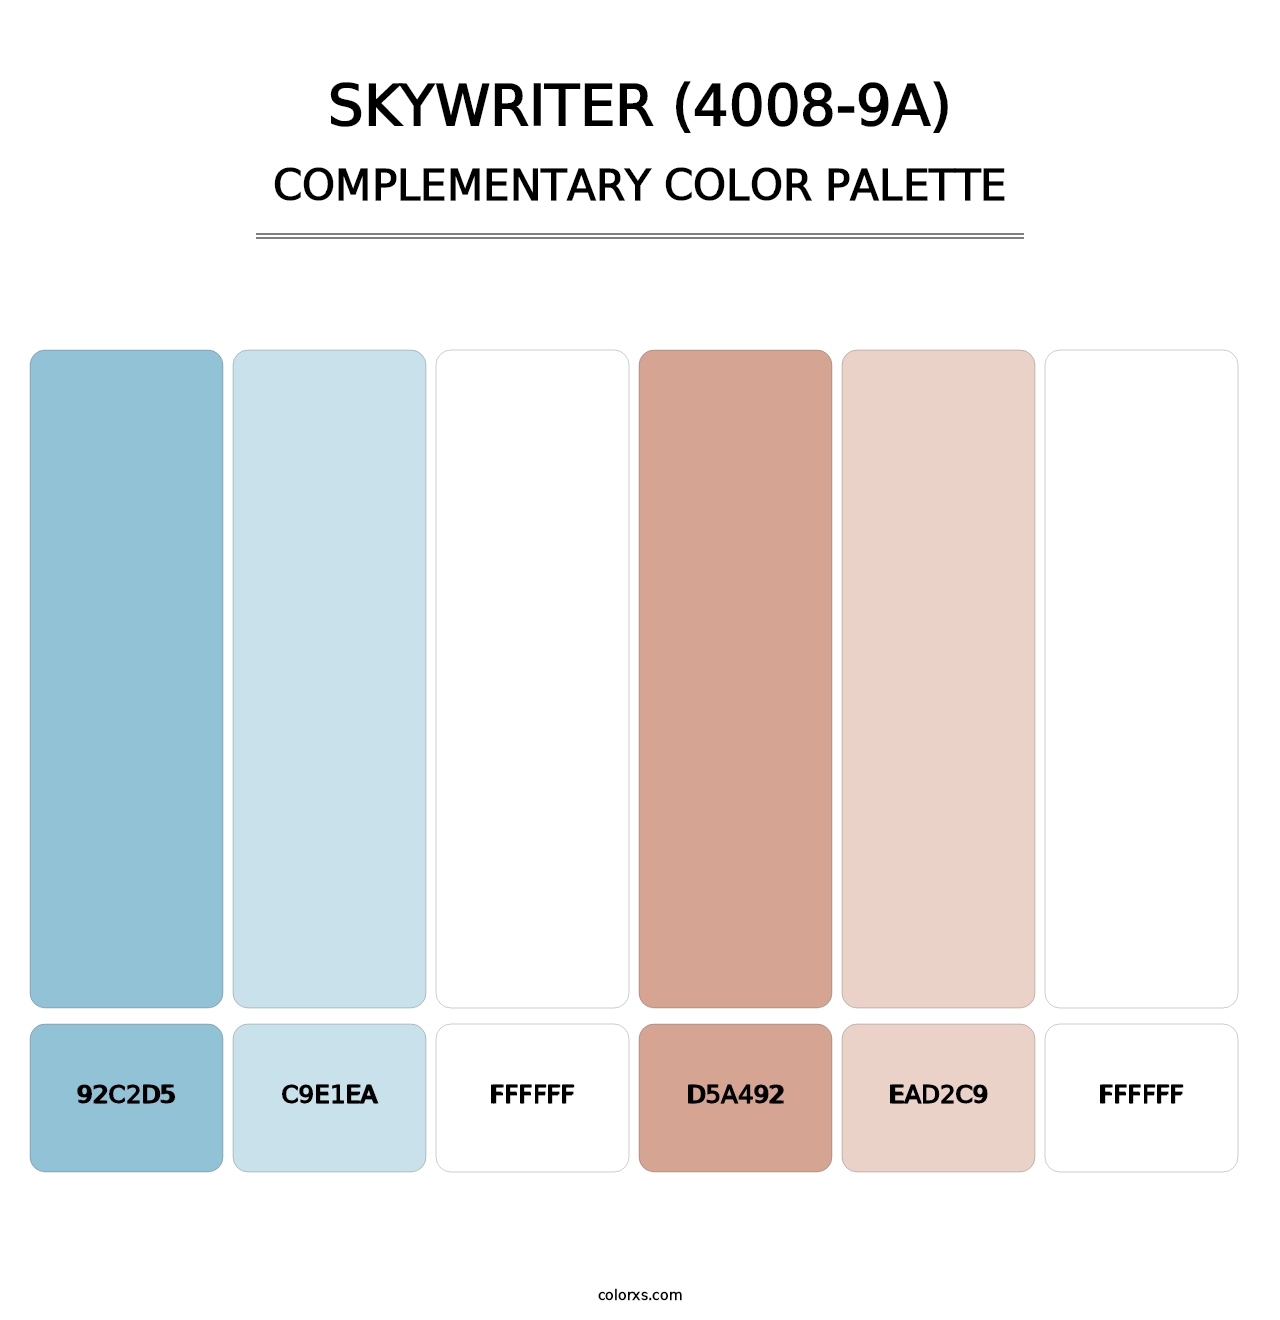 Skywriter (4008-9A) - Complementary Color Palette